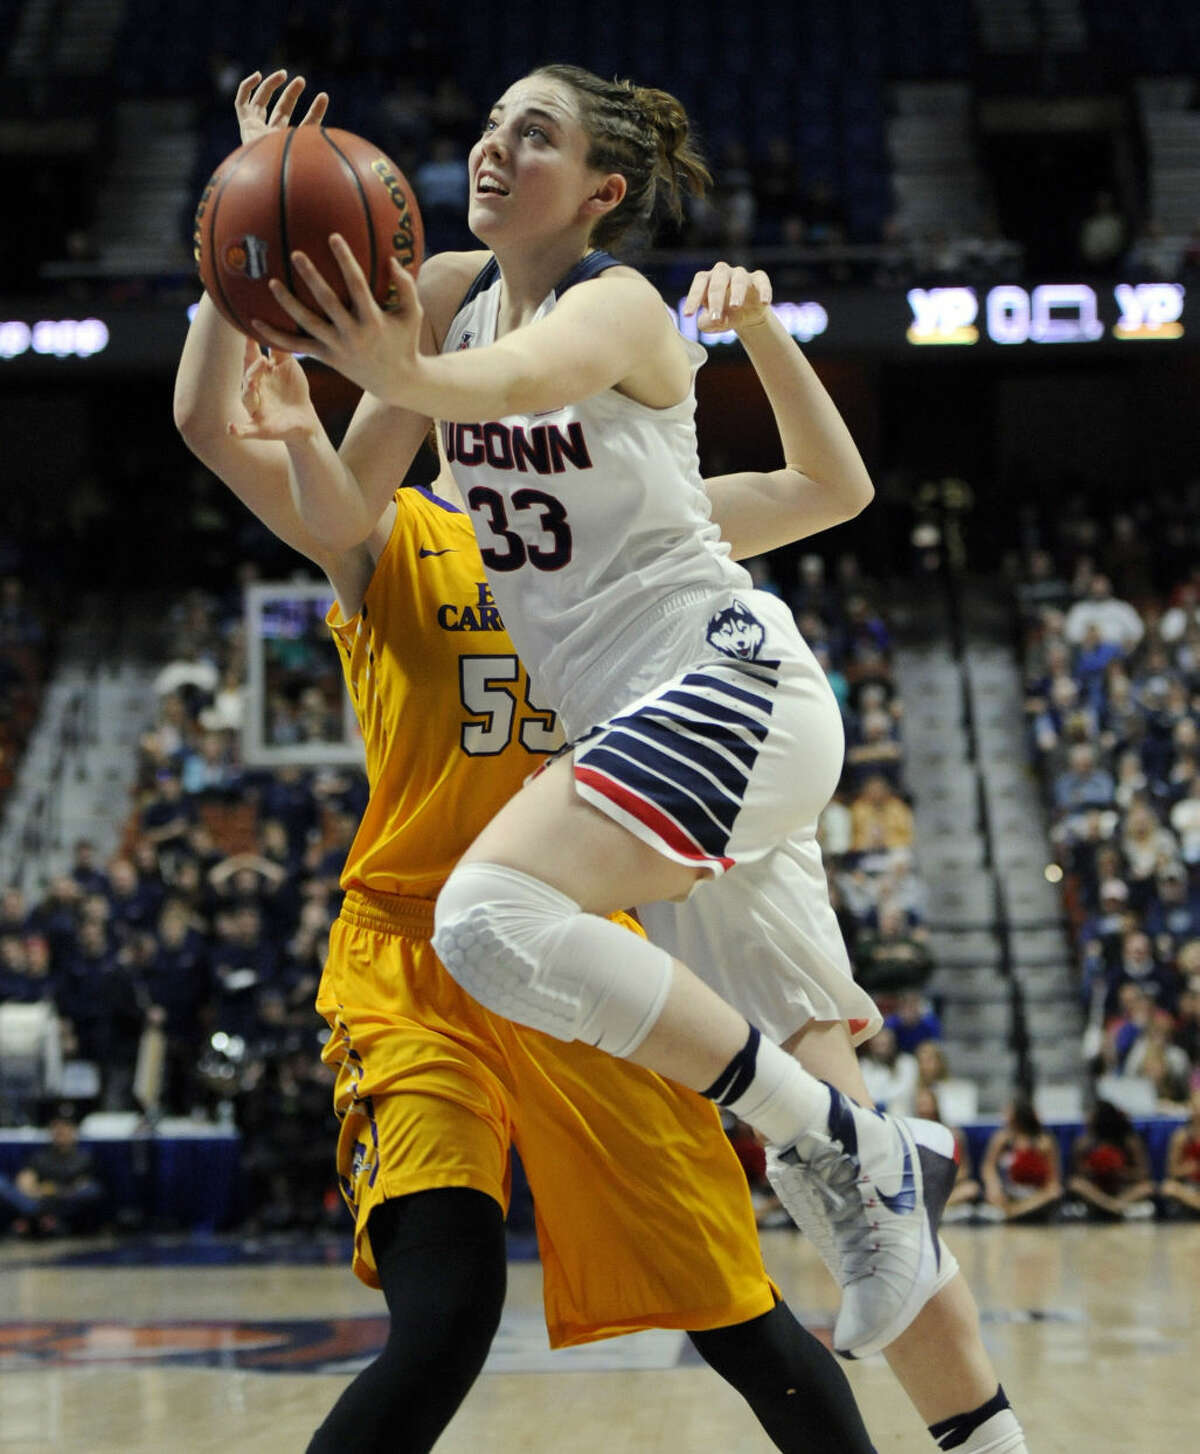 Connecticut’s Katie Lou Samuelson drives to the basket around East Carolina’s Marina Laramie, back, during the first half of an NCAA college basketball game in the American Athletic Conference tournament quarterfinals at Mohegan Sun Arena, Saturday, March 5, 2016, in Uncasville, Conn. (AP Photo/Jessica Hill)